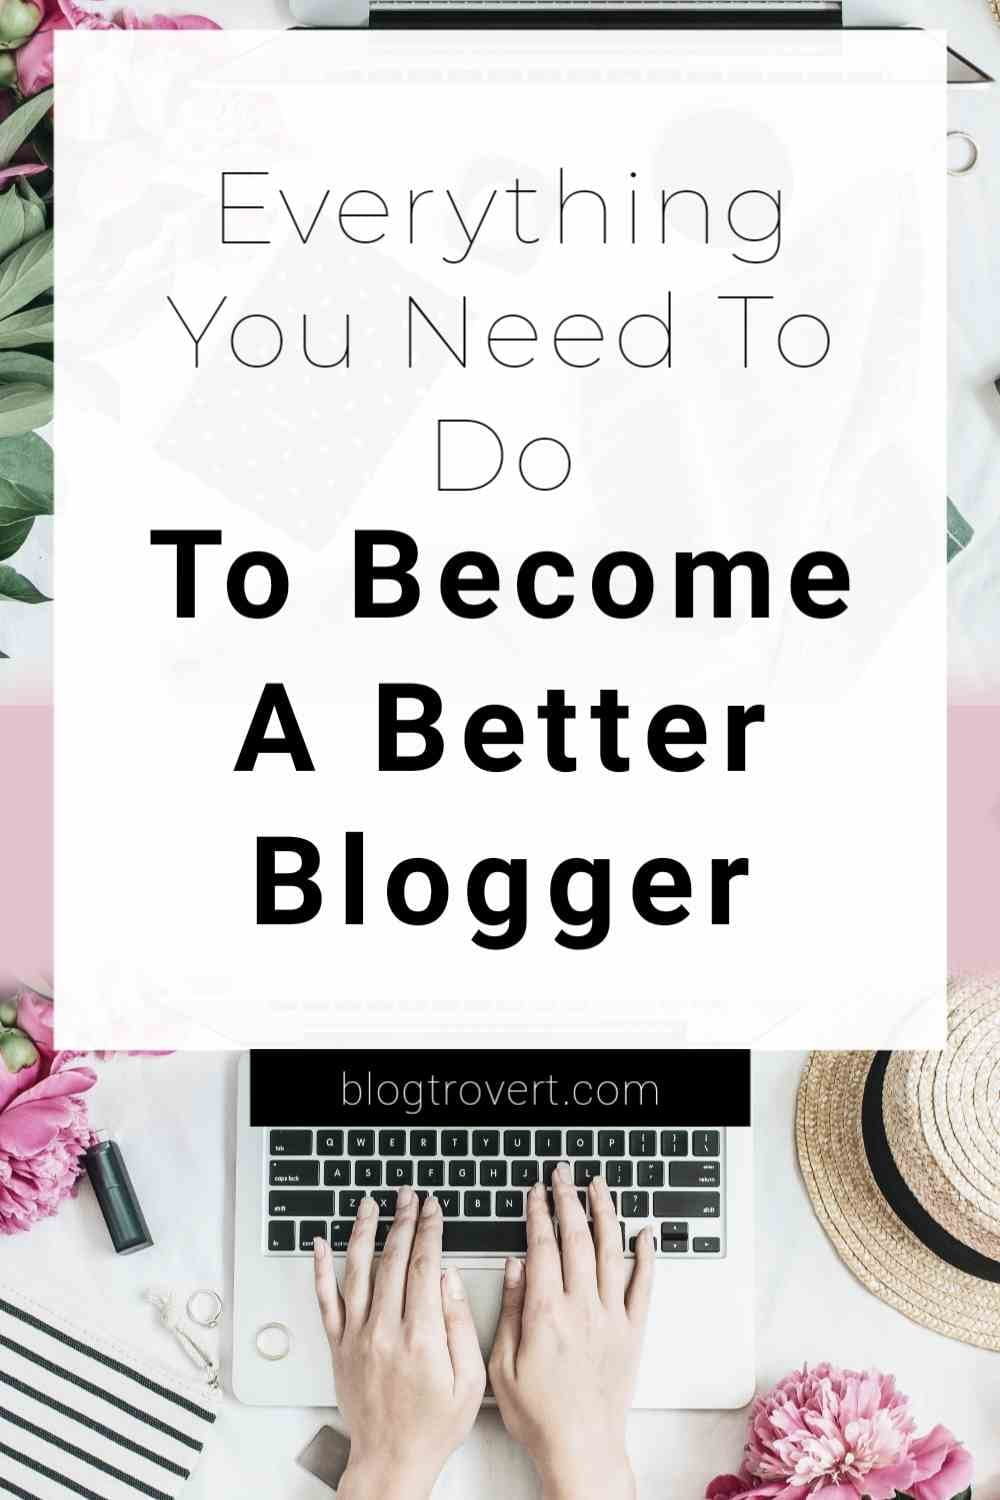 How To Become a Better Blogger - 13 helpful guides for Amateur bloggers 4